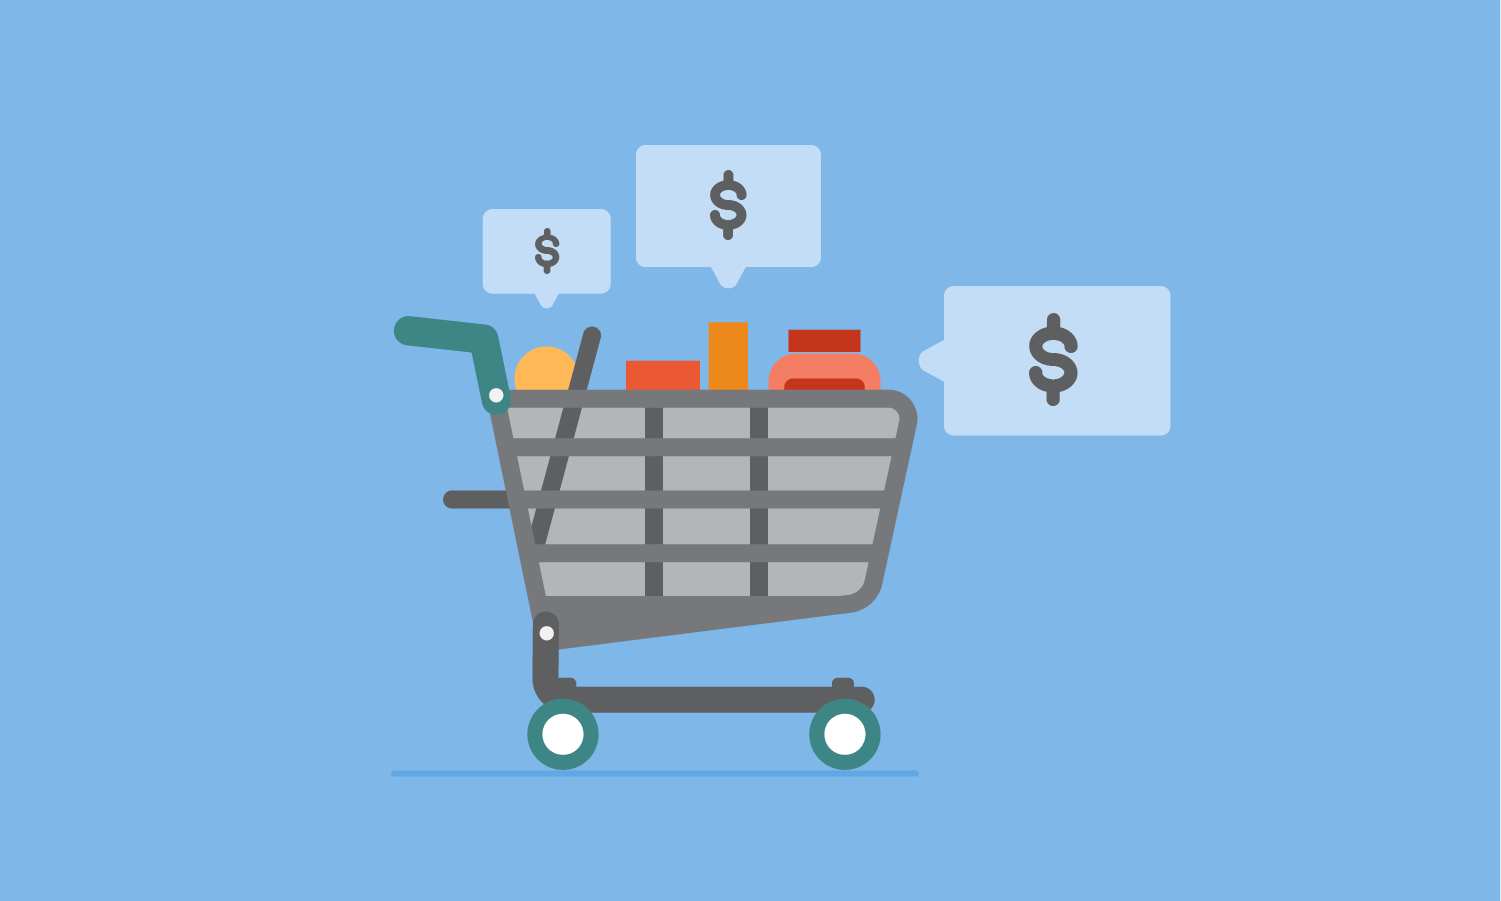 Grocery shopping cart surrounded by dollar signs in speech bubbles